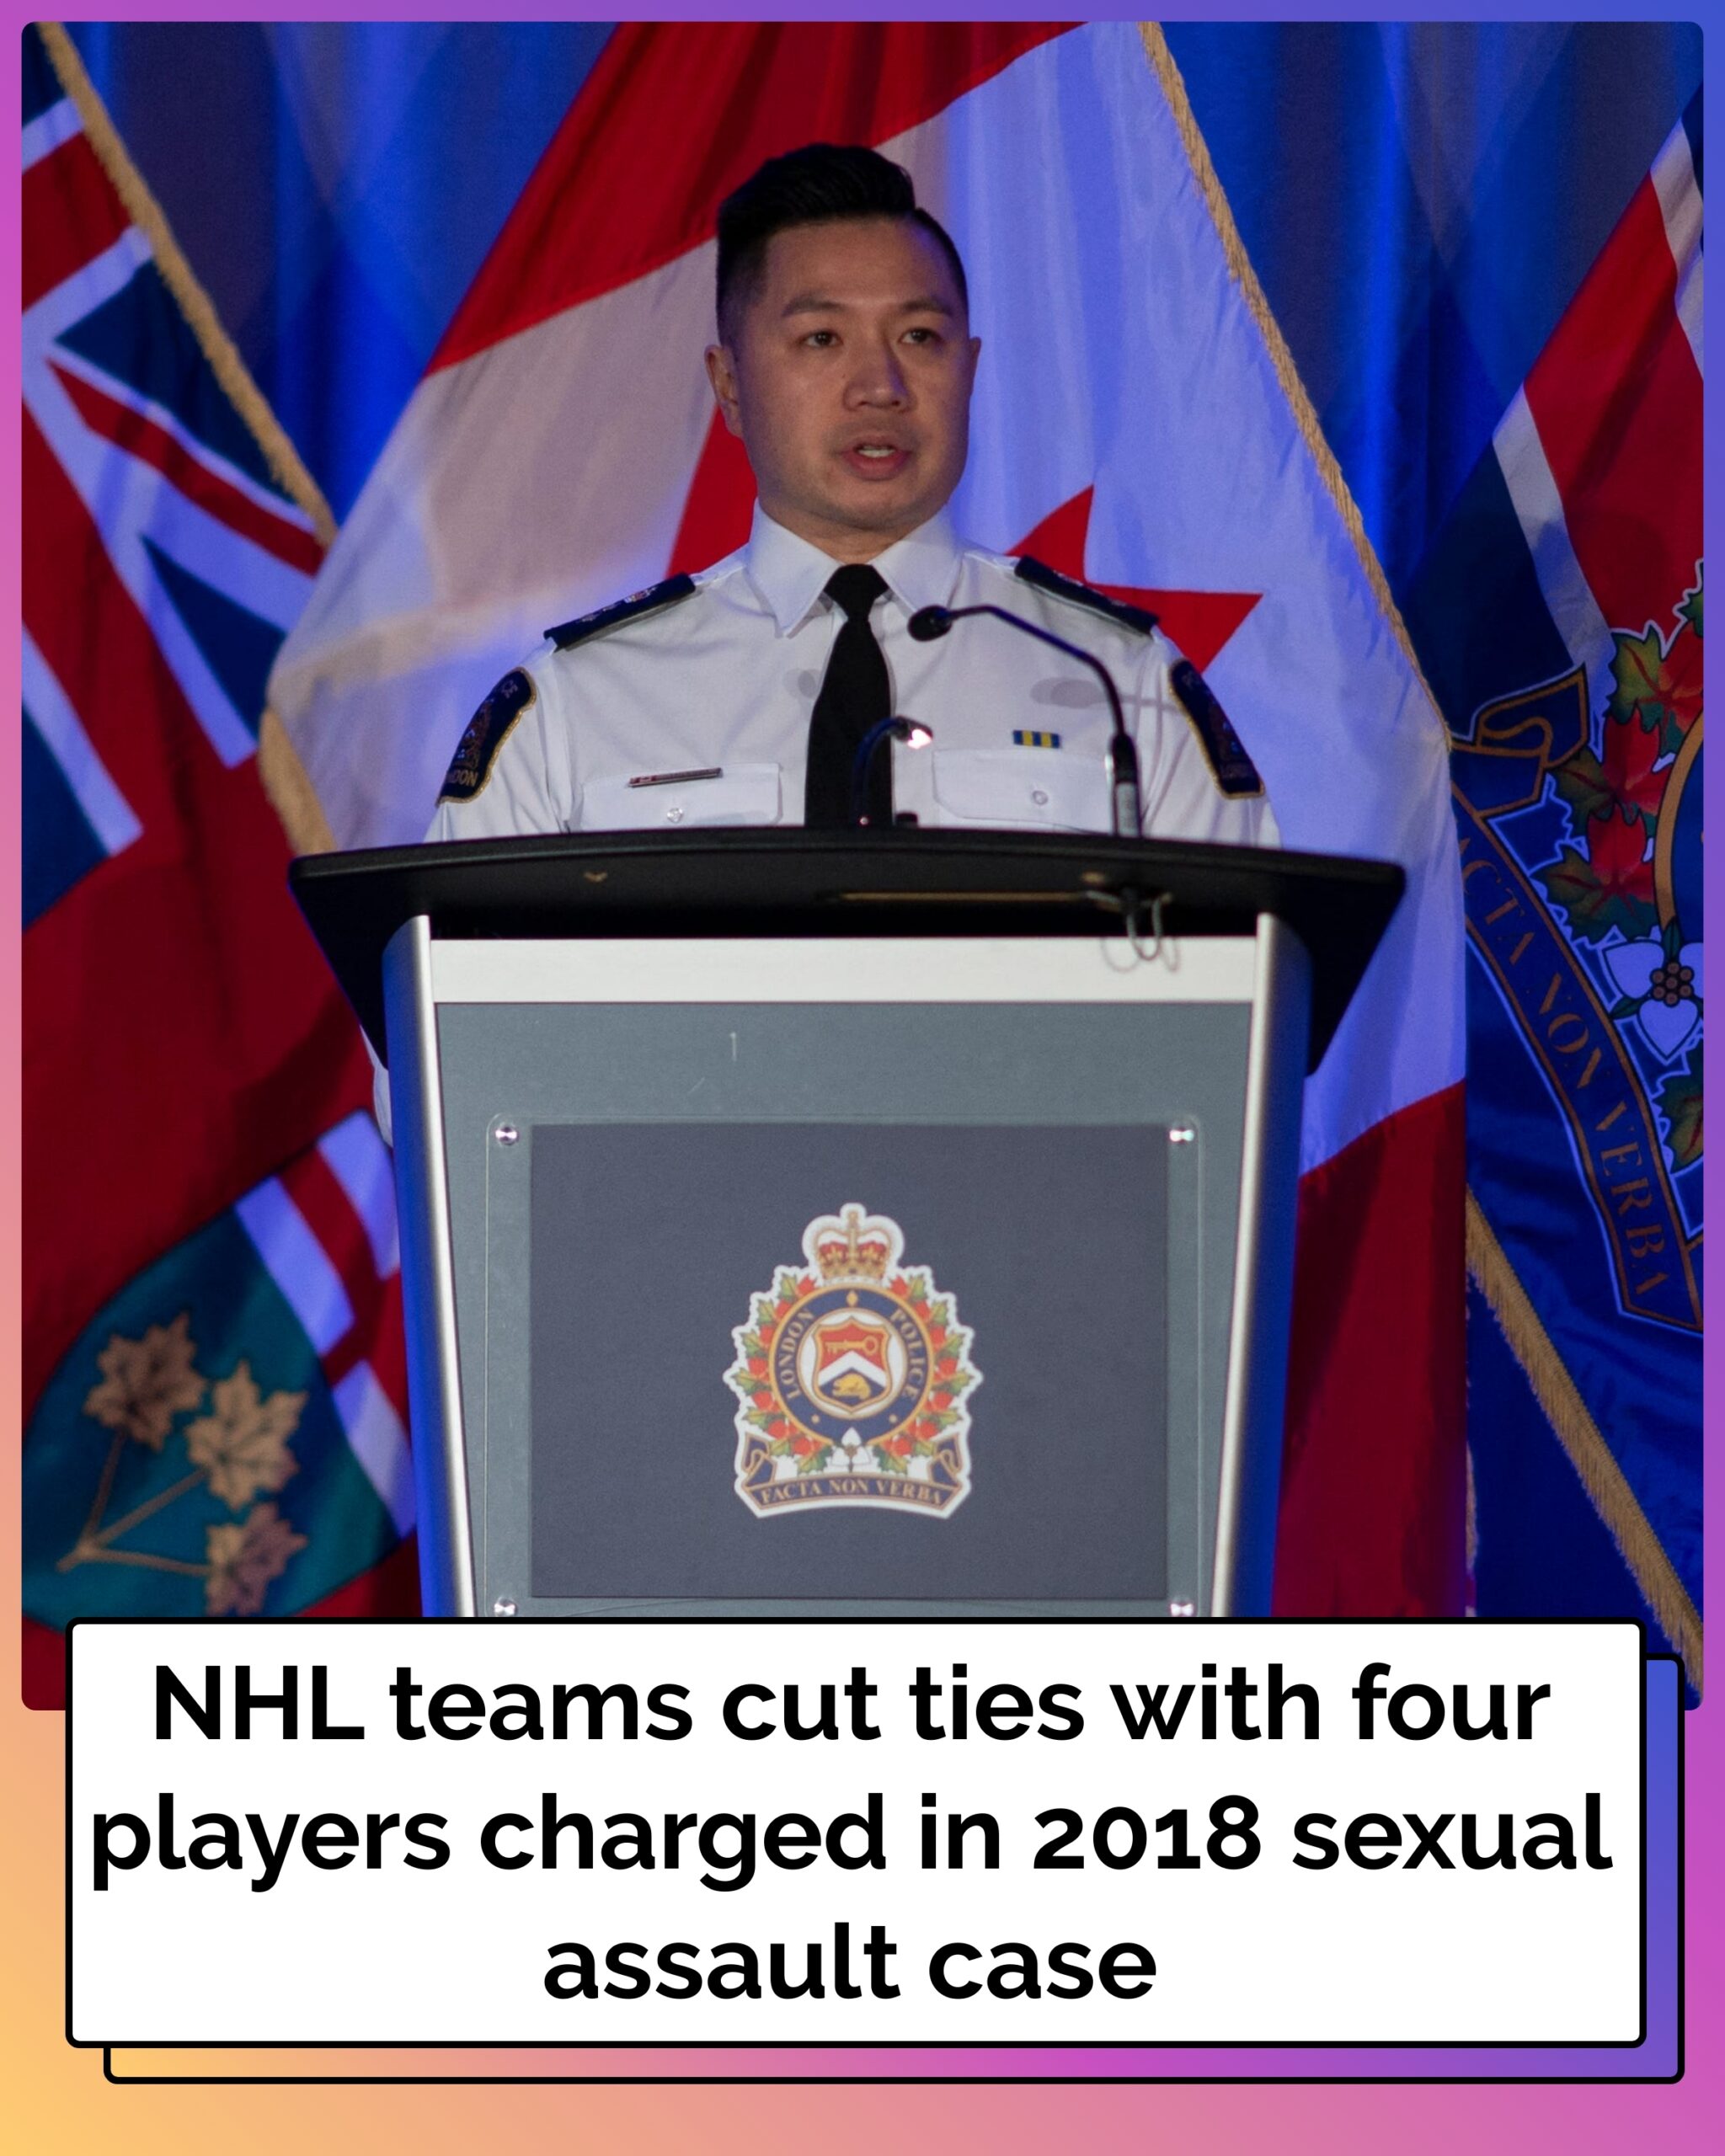 NHL Teams Cut Ties with Four Players Charged in 2018 Sexual Assault Case